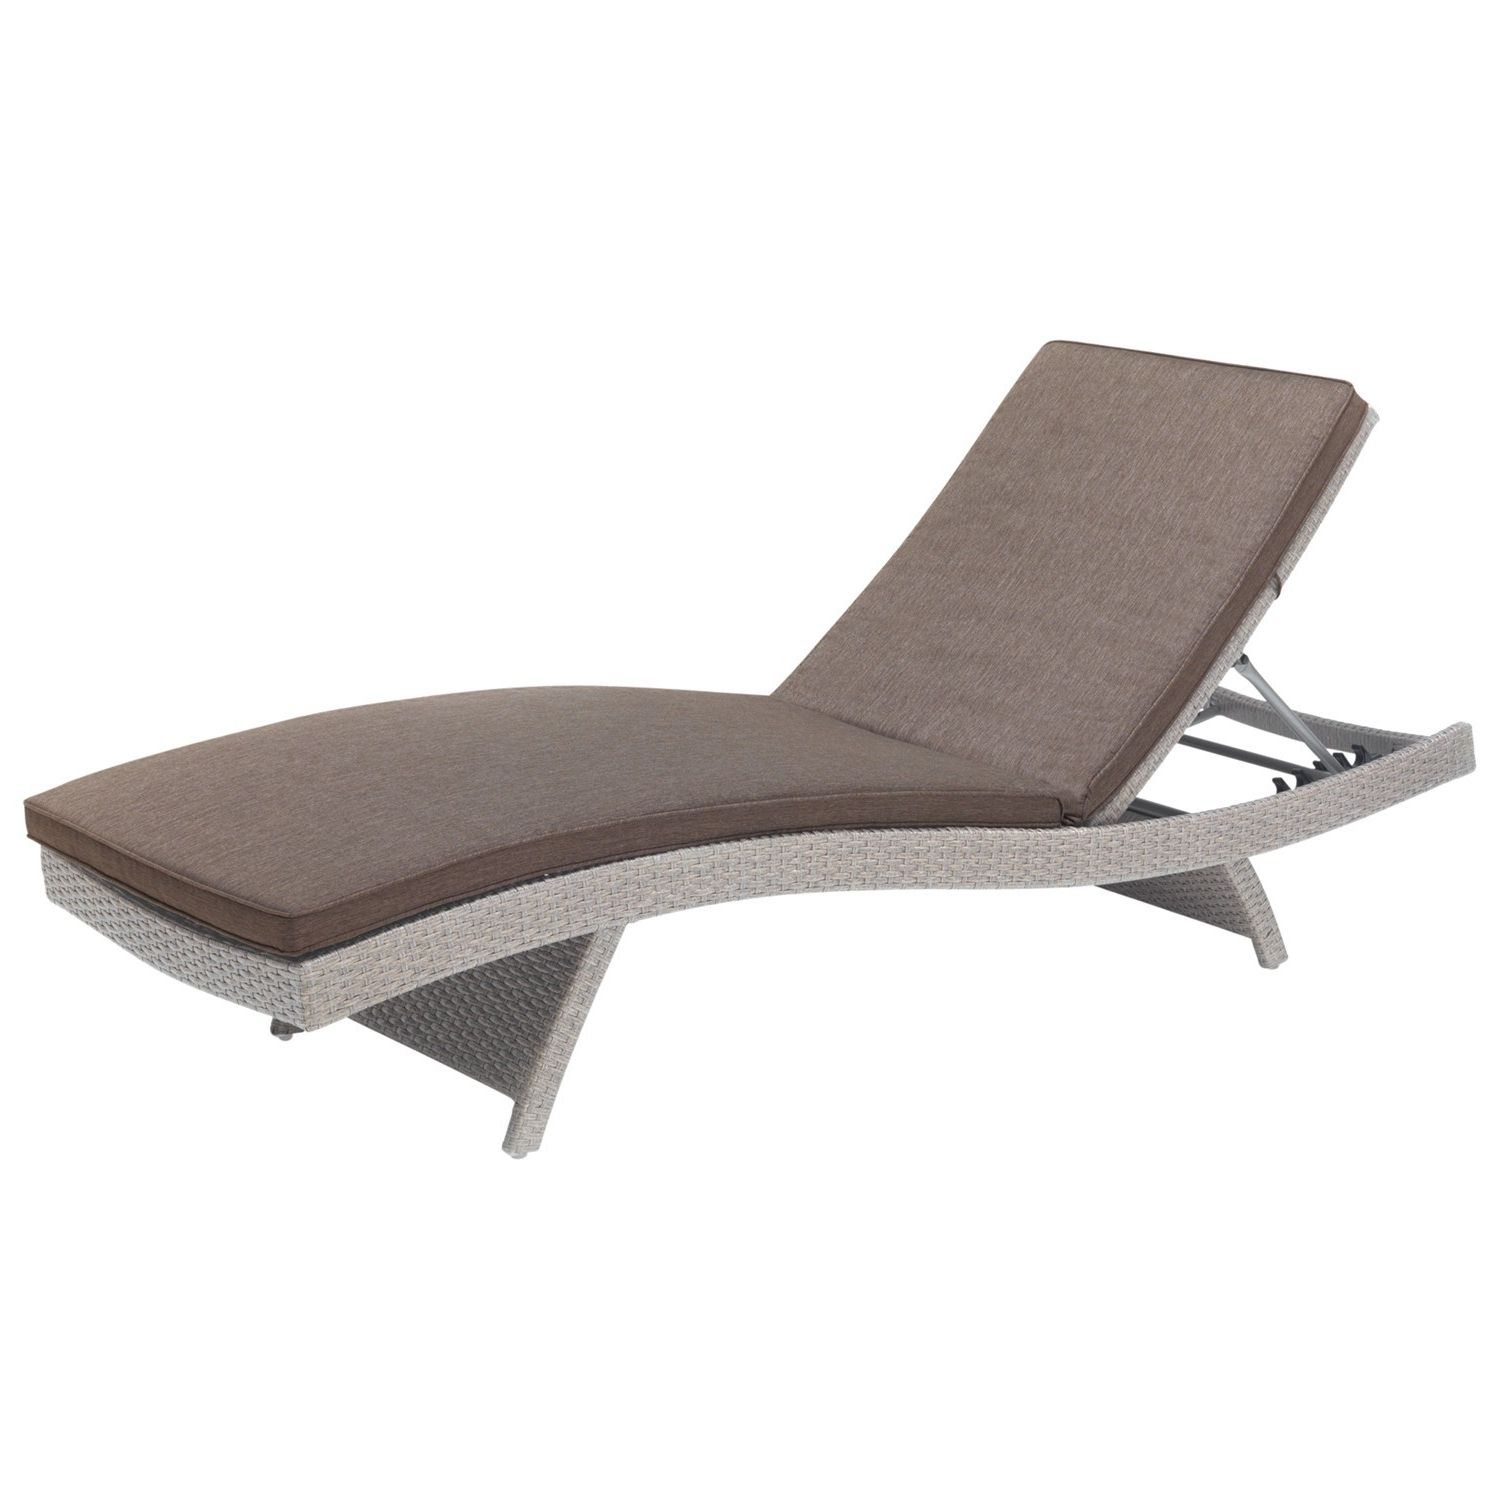 2017 Kettler Chaise Lounge Chairs In Kettler Universal Sun Lounger – White Wash With Taupe Cushion From (View 9 of 15)